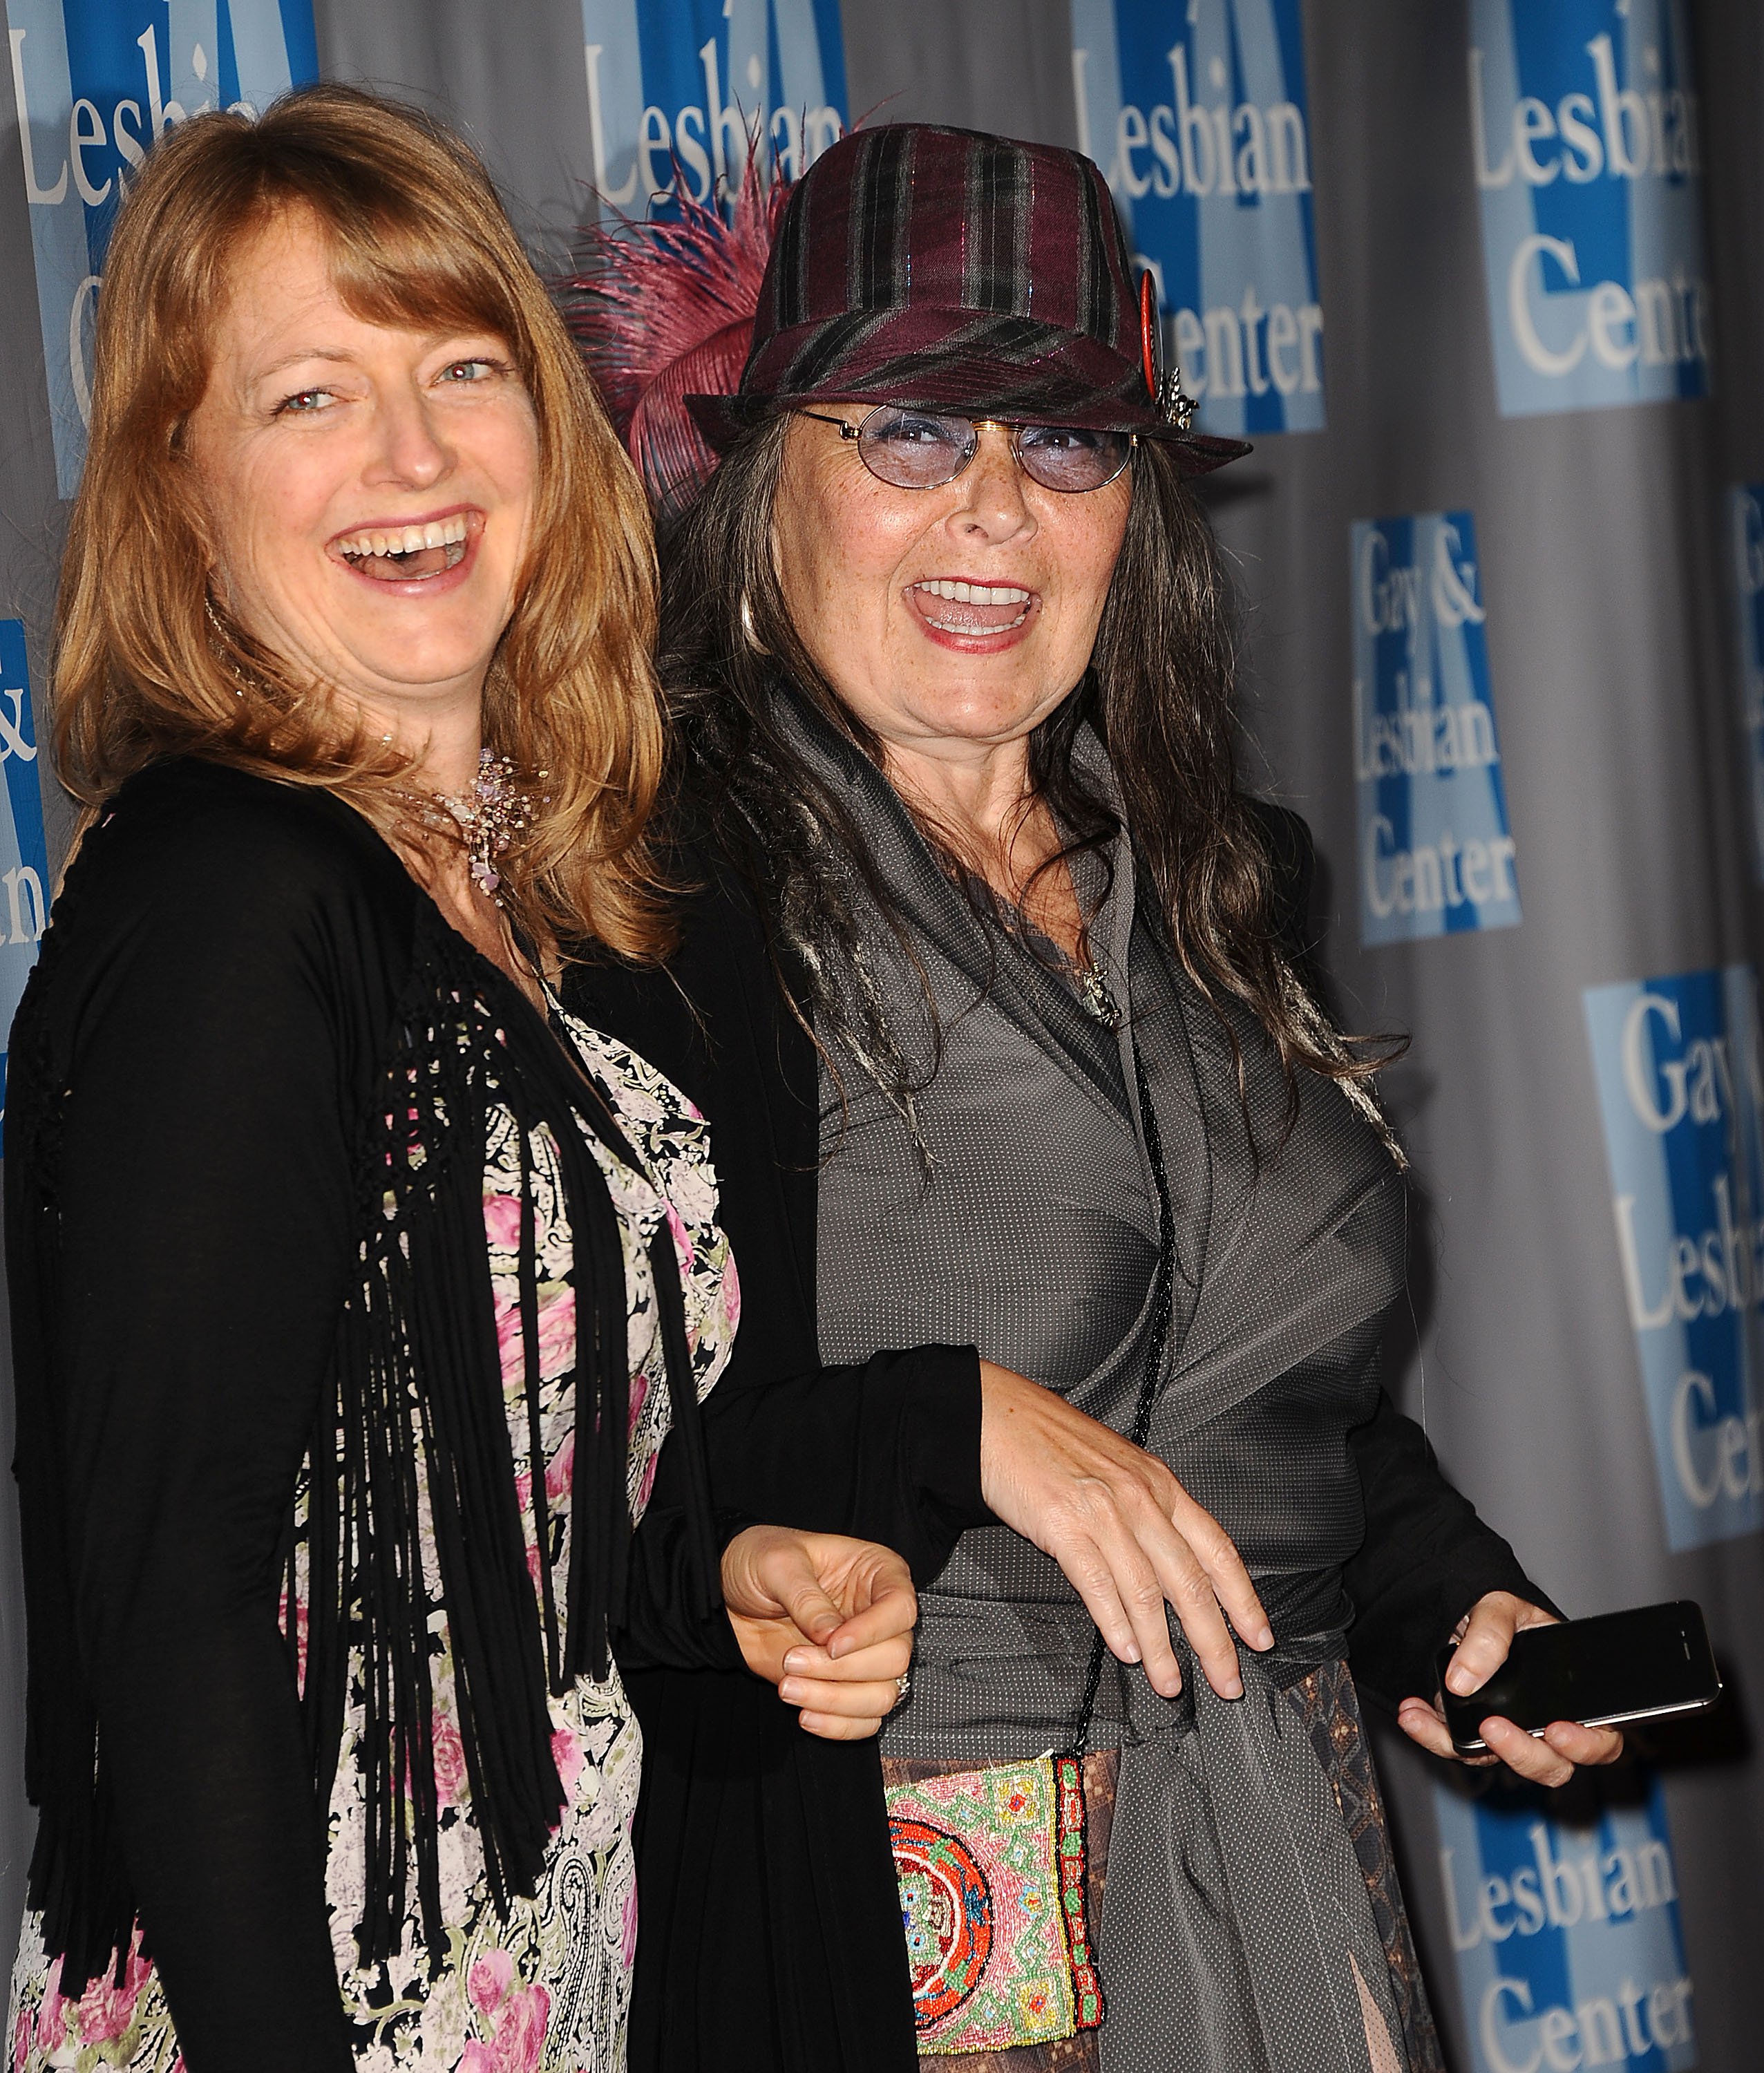 Brandi Brown and Roseanne Barr at the L.A. Gay & Lesbian Center's "An Evening With Women" on May 19, 2012, in Beverly Hills, California. | Source: Jason LaVeris/FilmMagic/Getty Images